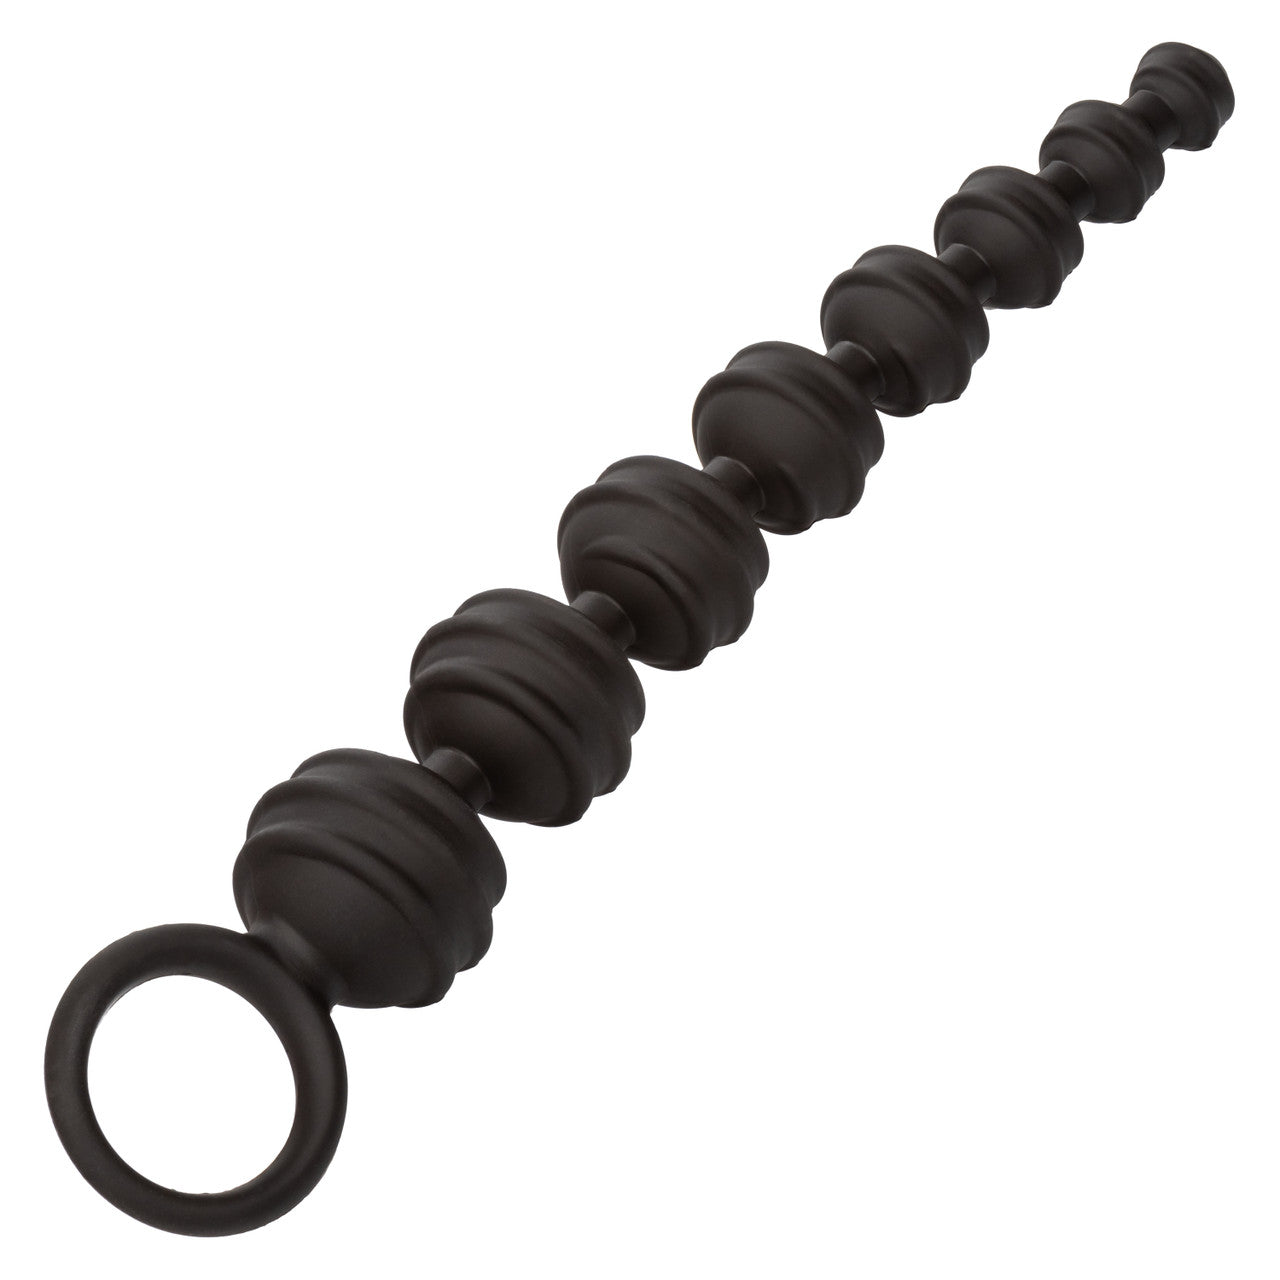 Colt Power Drill Balls - Black - Thorn & Feather Sex Toy Canada